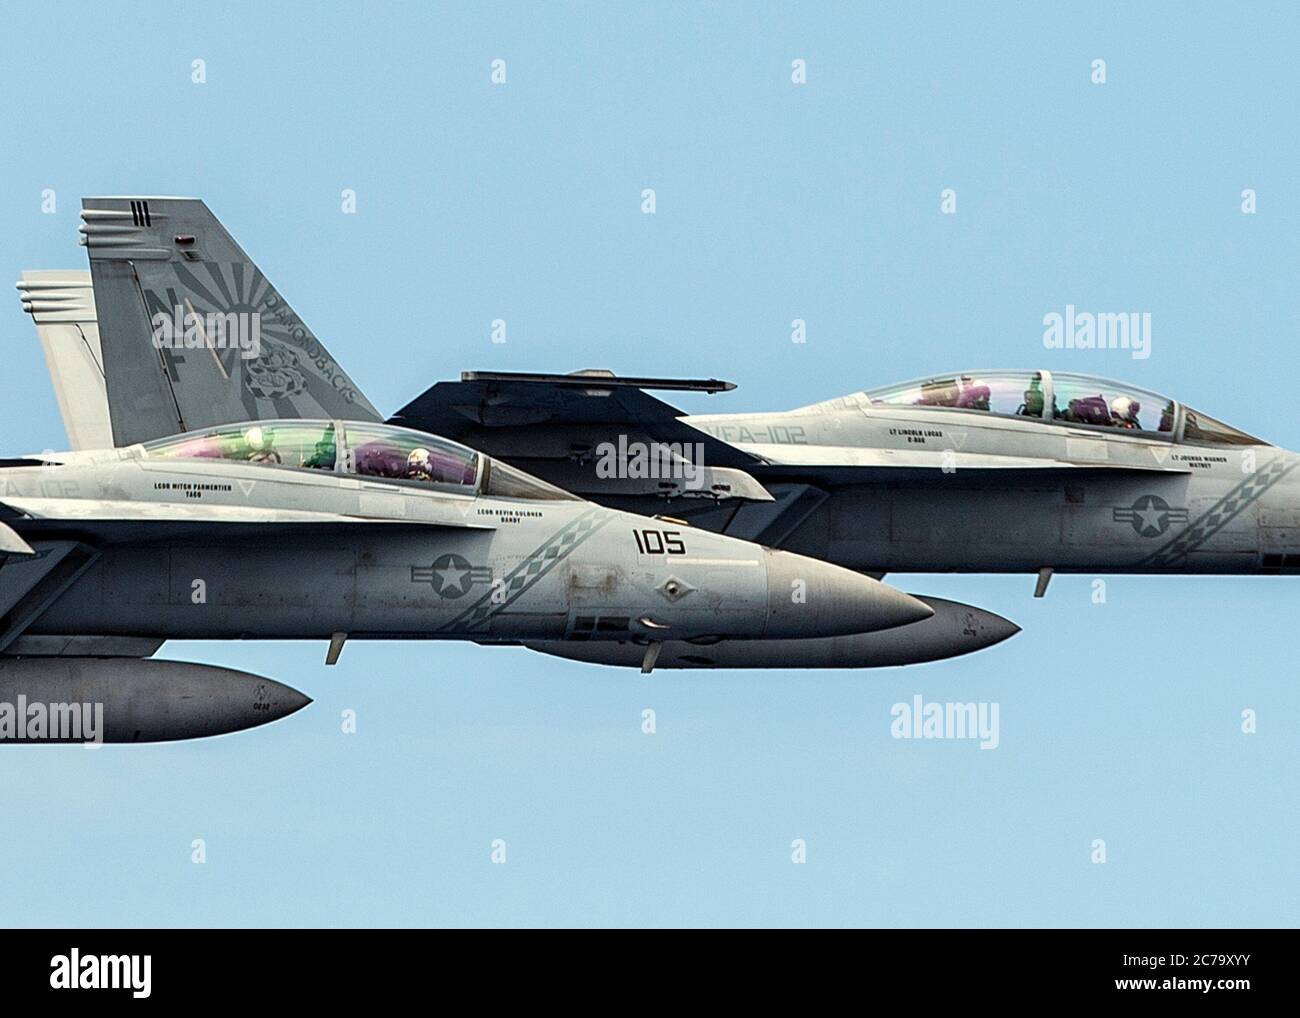 Two U.S. Navy F/A-18F Super Hornet fighter aircraft, from the Diamondbacks of Strike Fighter Squadron 102, fly in formation off the aircraft carrier USS Ronald Reagan May 30, 2020 in the Philippine Sea. Commander, of the U.S. 7th Fleet, Vice Adm. Bill Merz hitched a ride in the back seat of the aircraft during a visit to the ship. Stock Photo